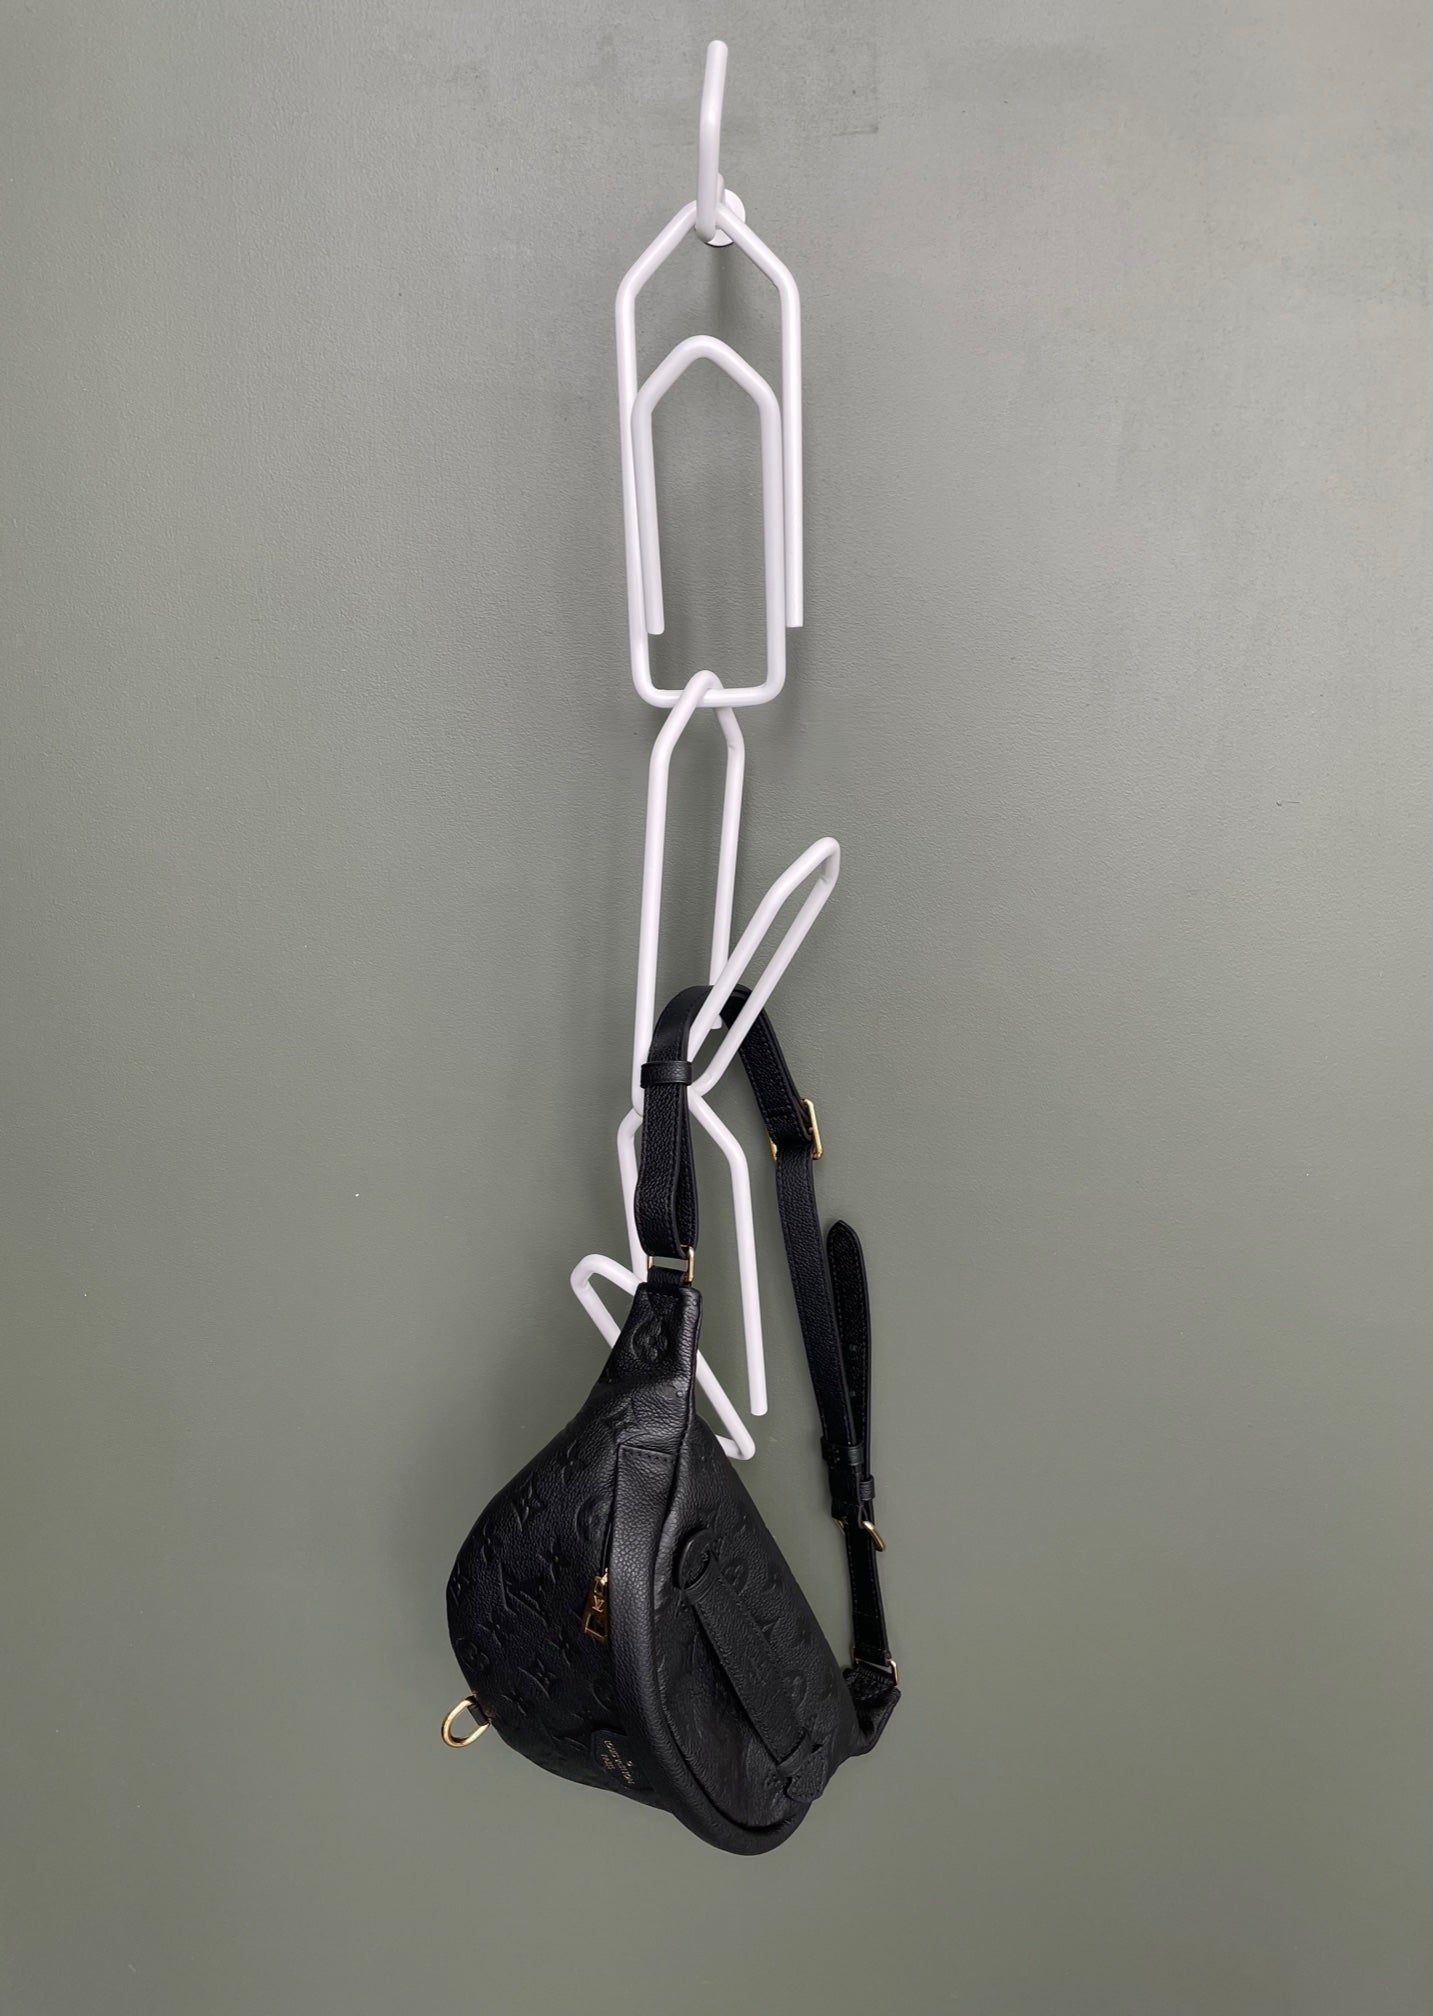 Clothes hanger "Ceiling"  (15 paper clips including ceiling hook)